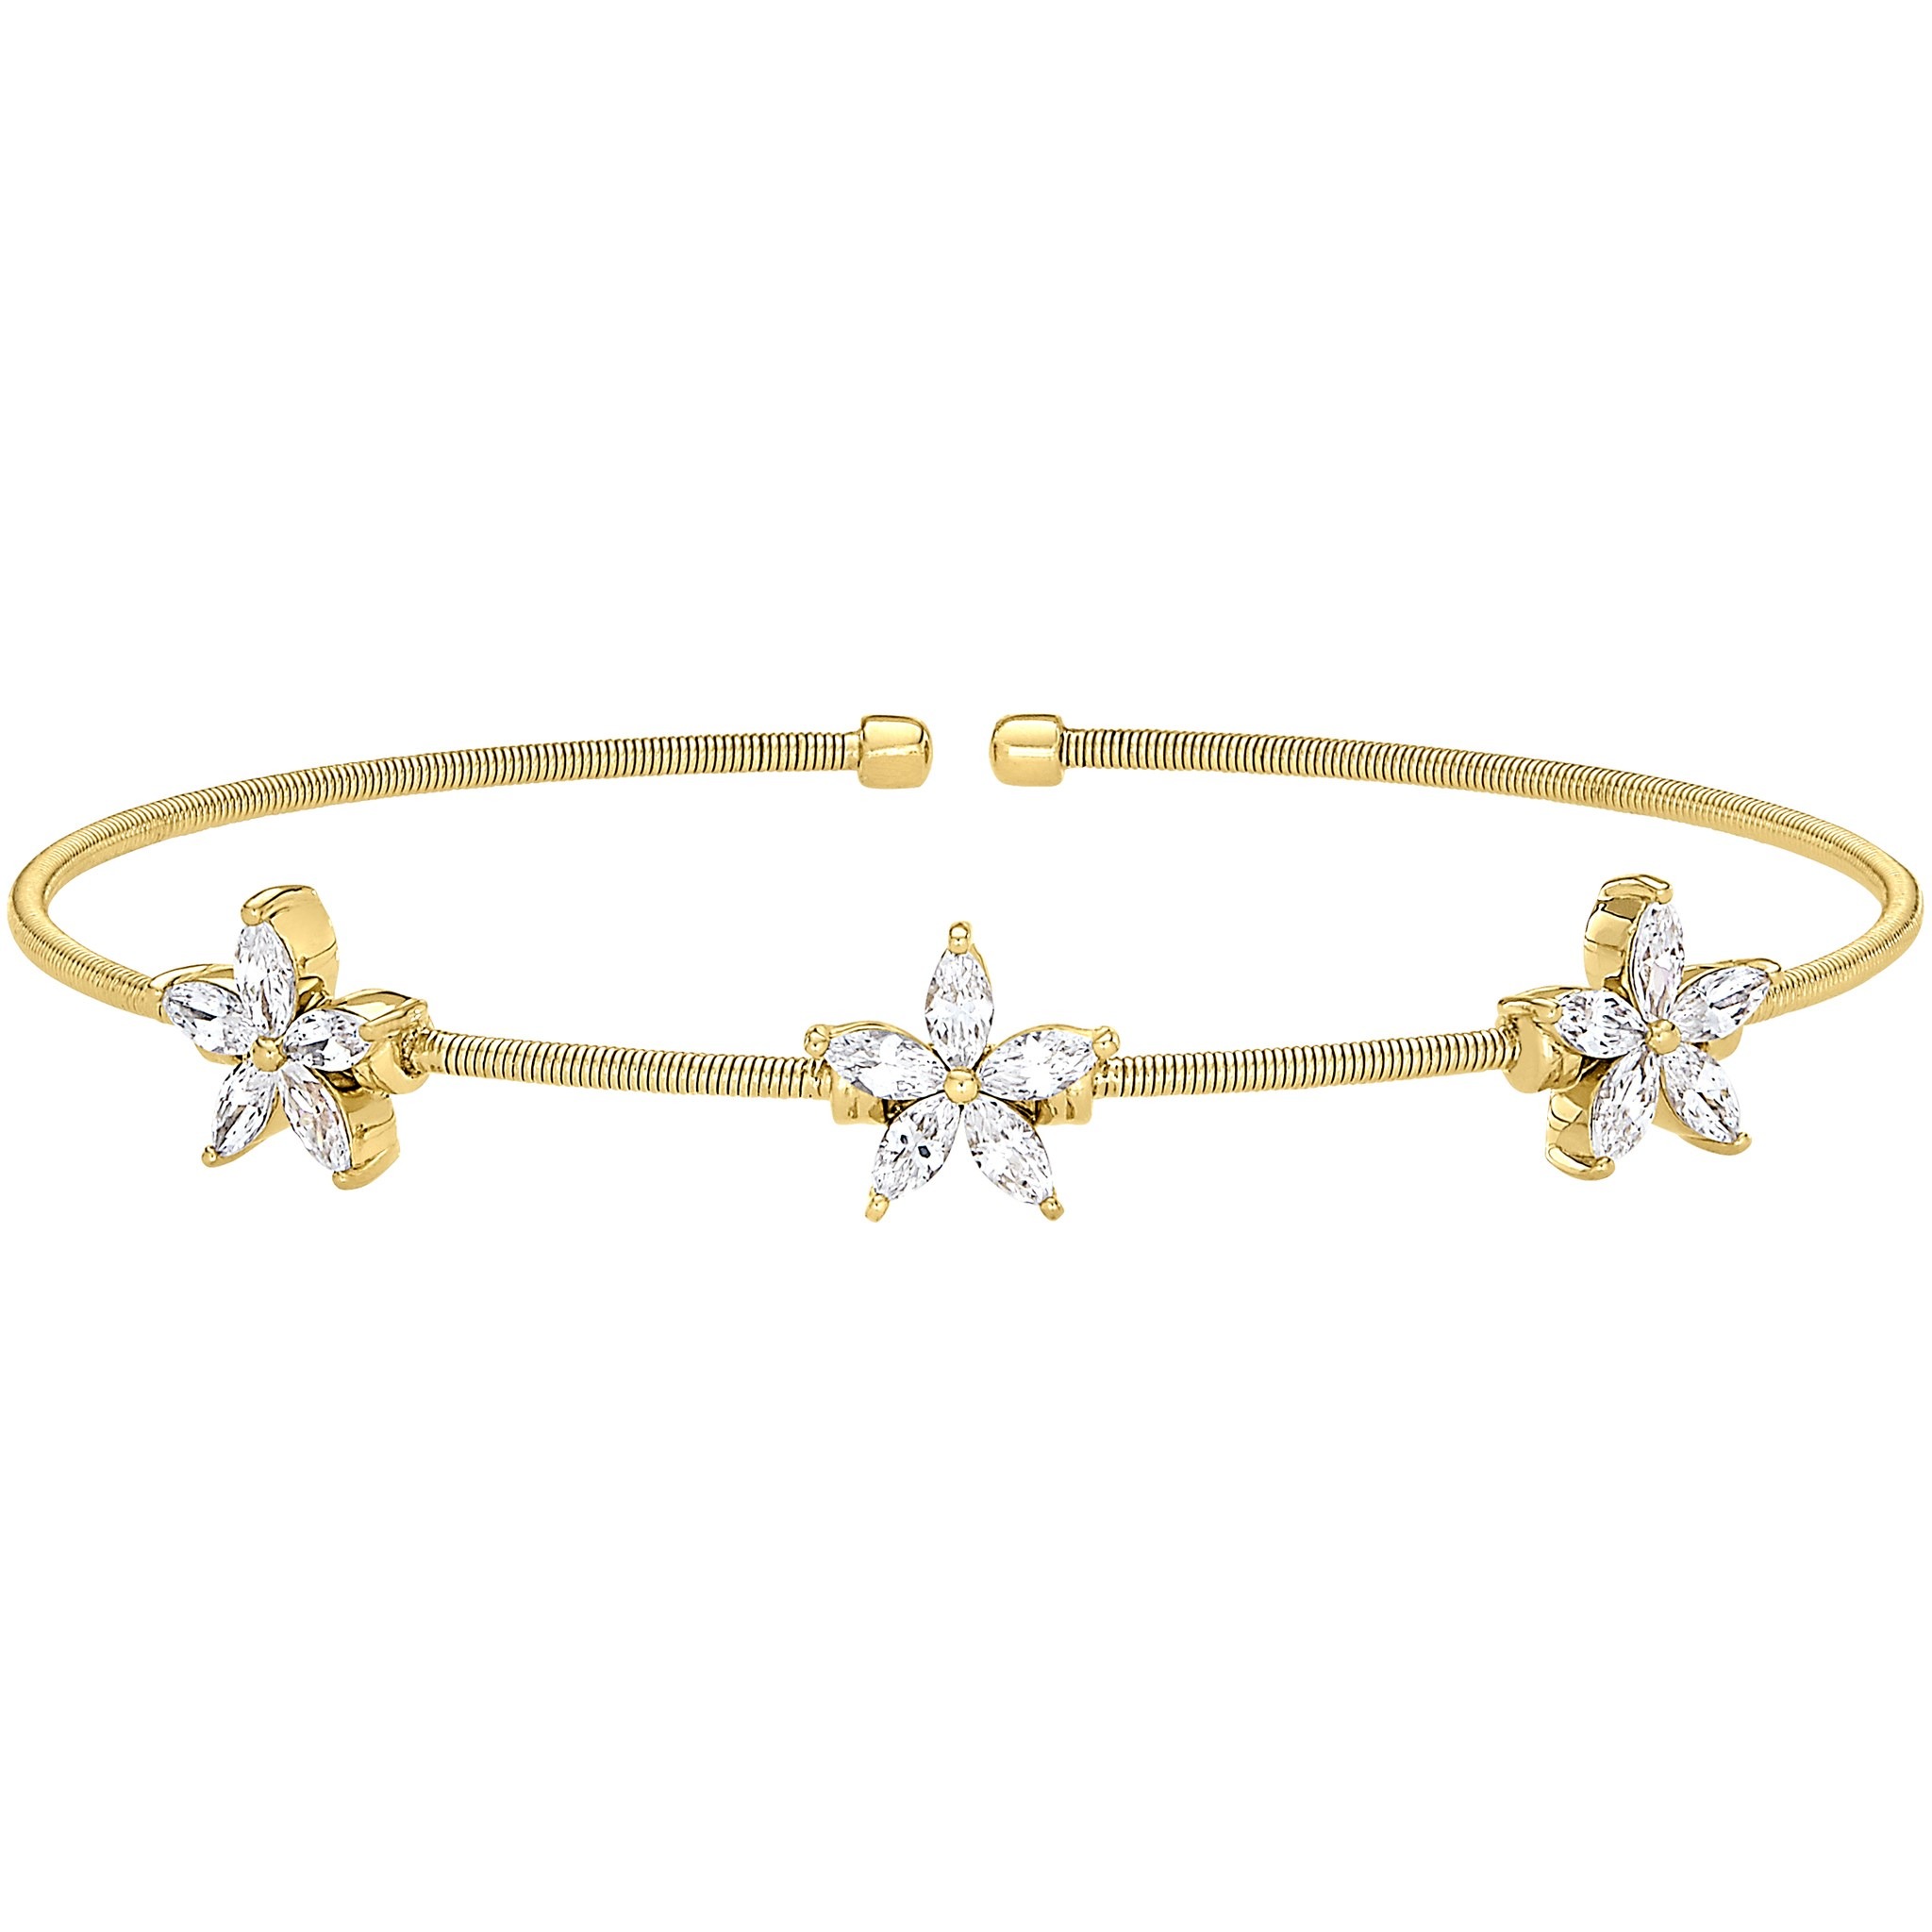 Gold Finish Sterling Silver Cable Cuff Bracelet with Simulated Diamond Flowers